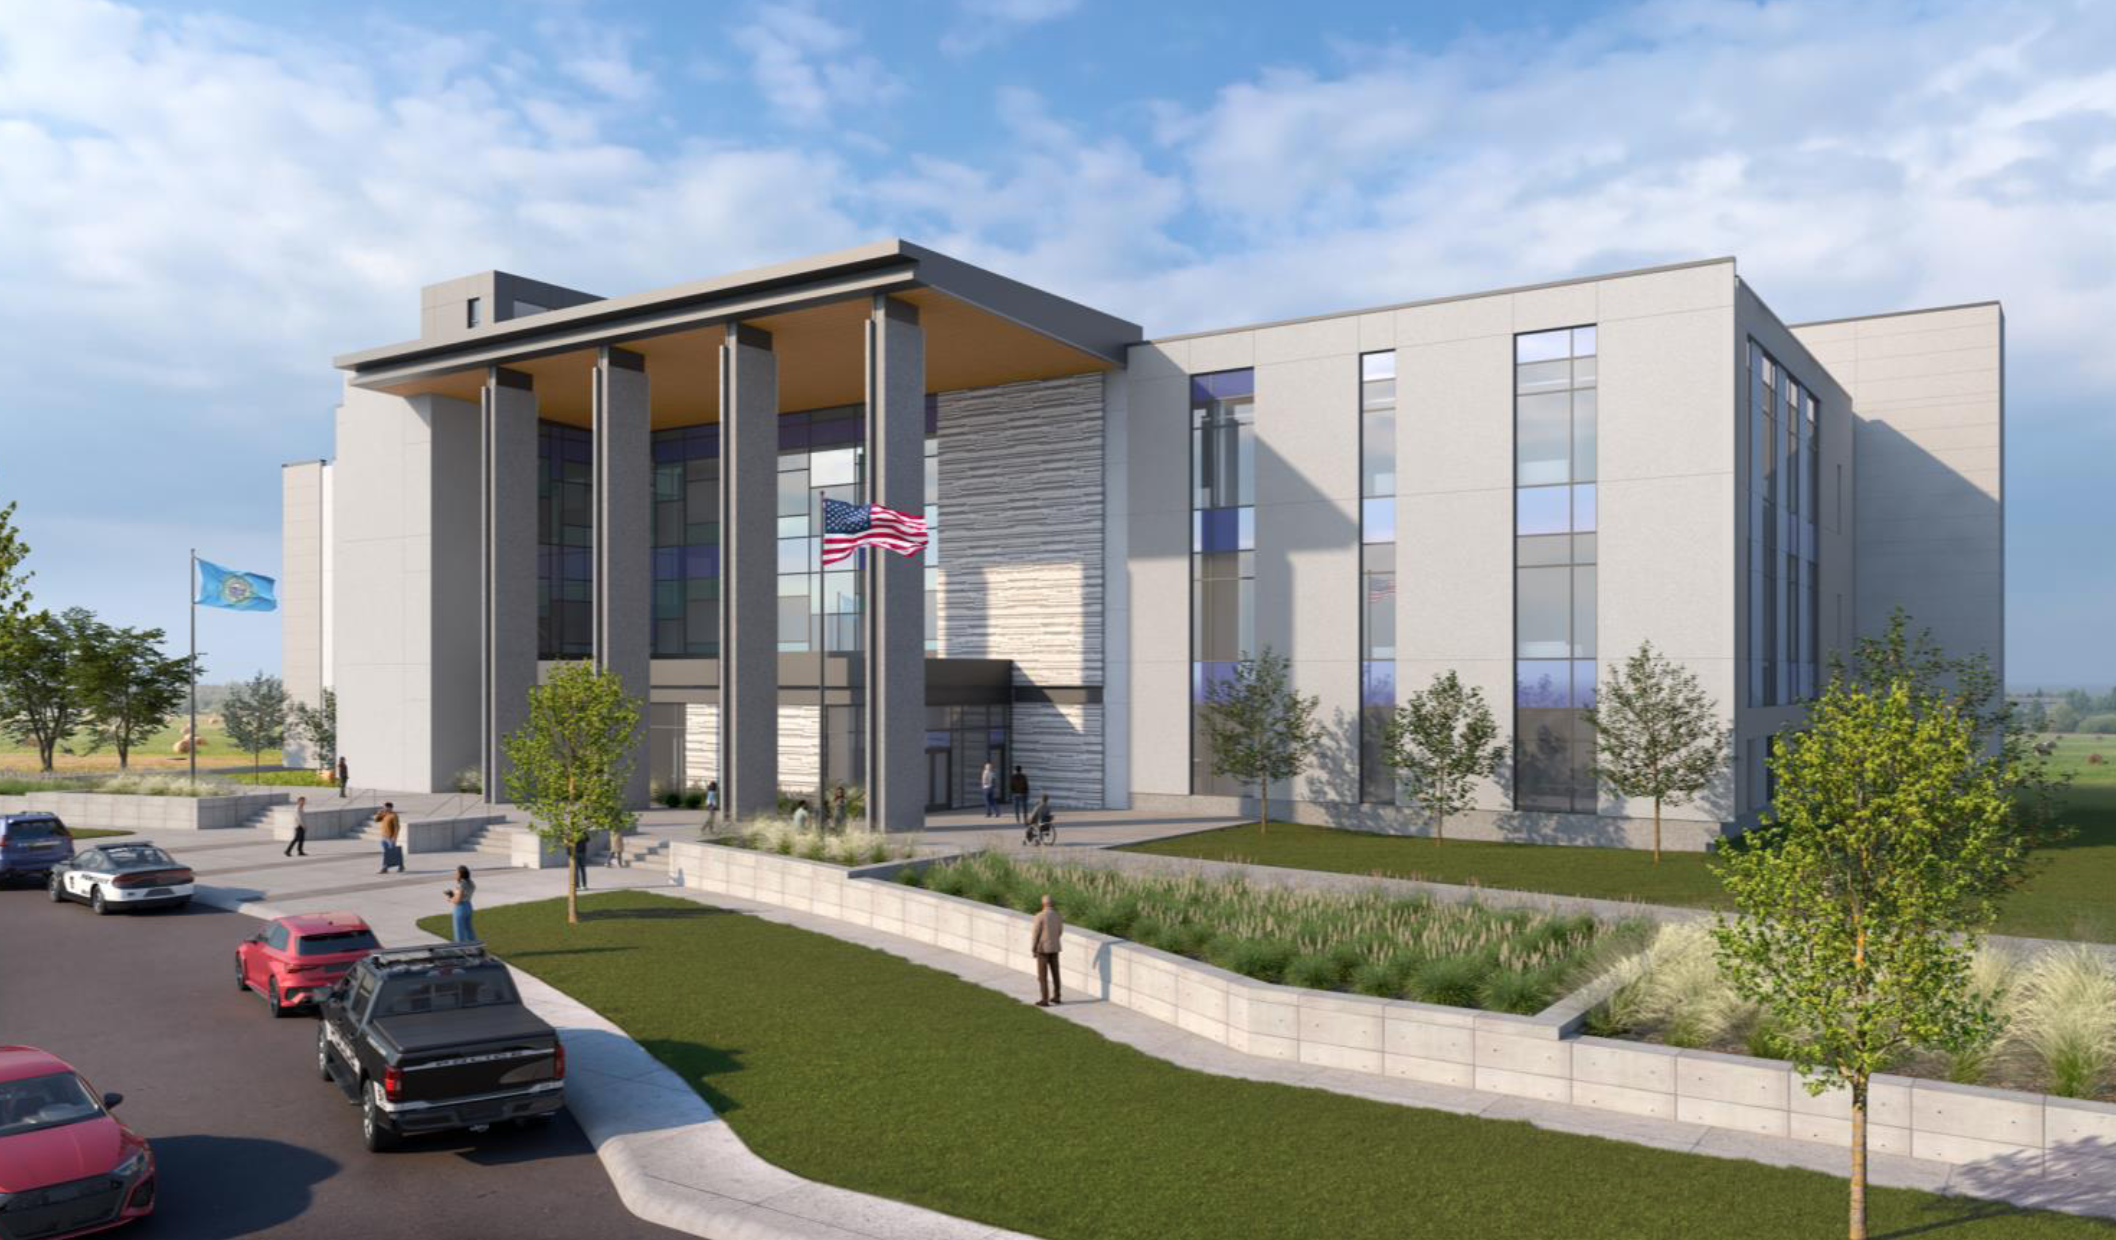 The design for a new, $45M Lincoln County courthouse is taking shape